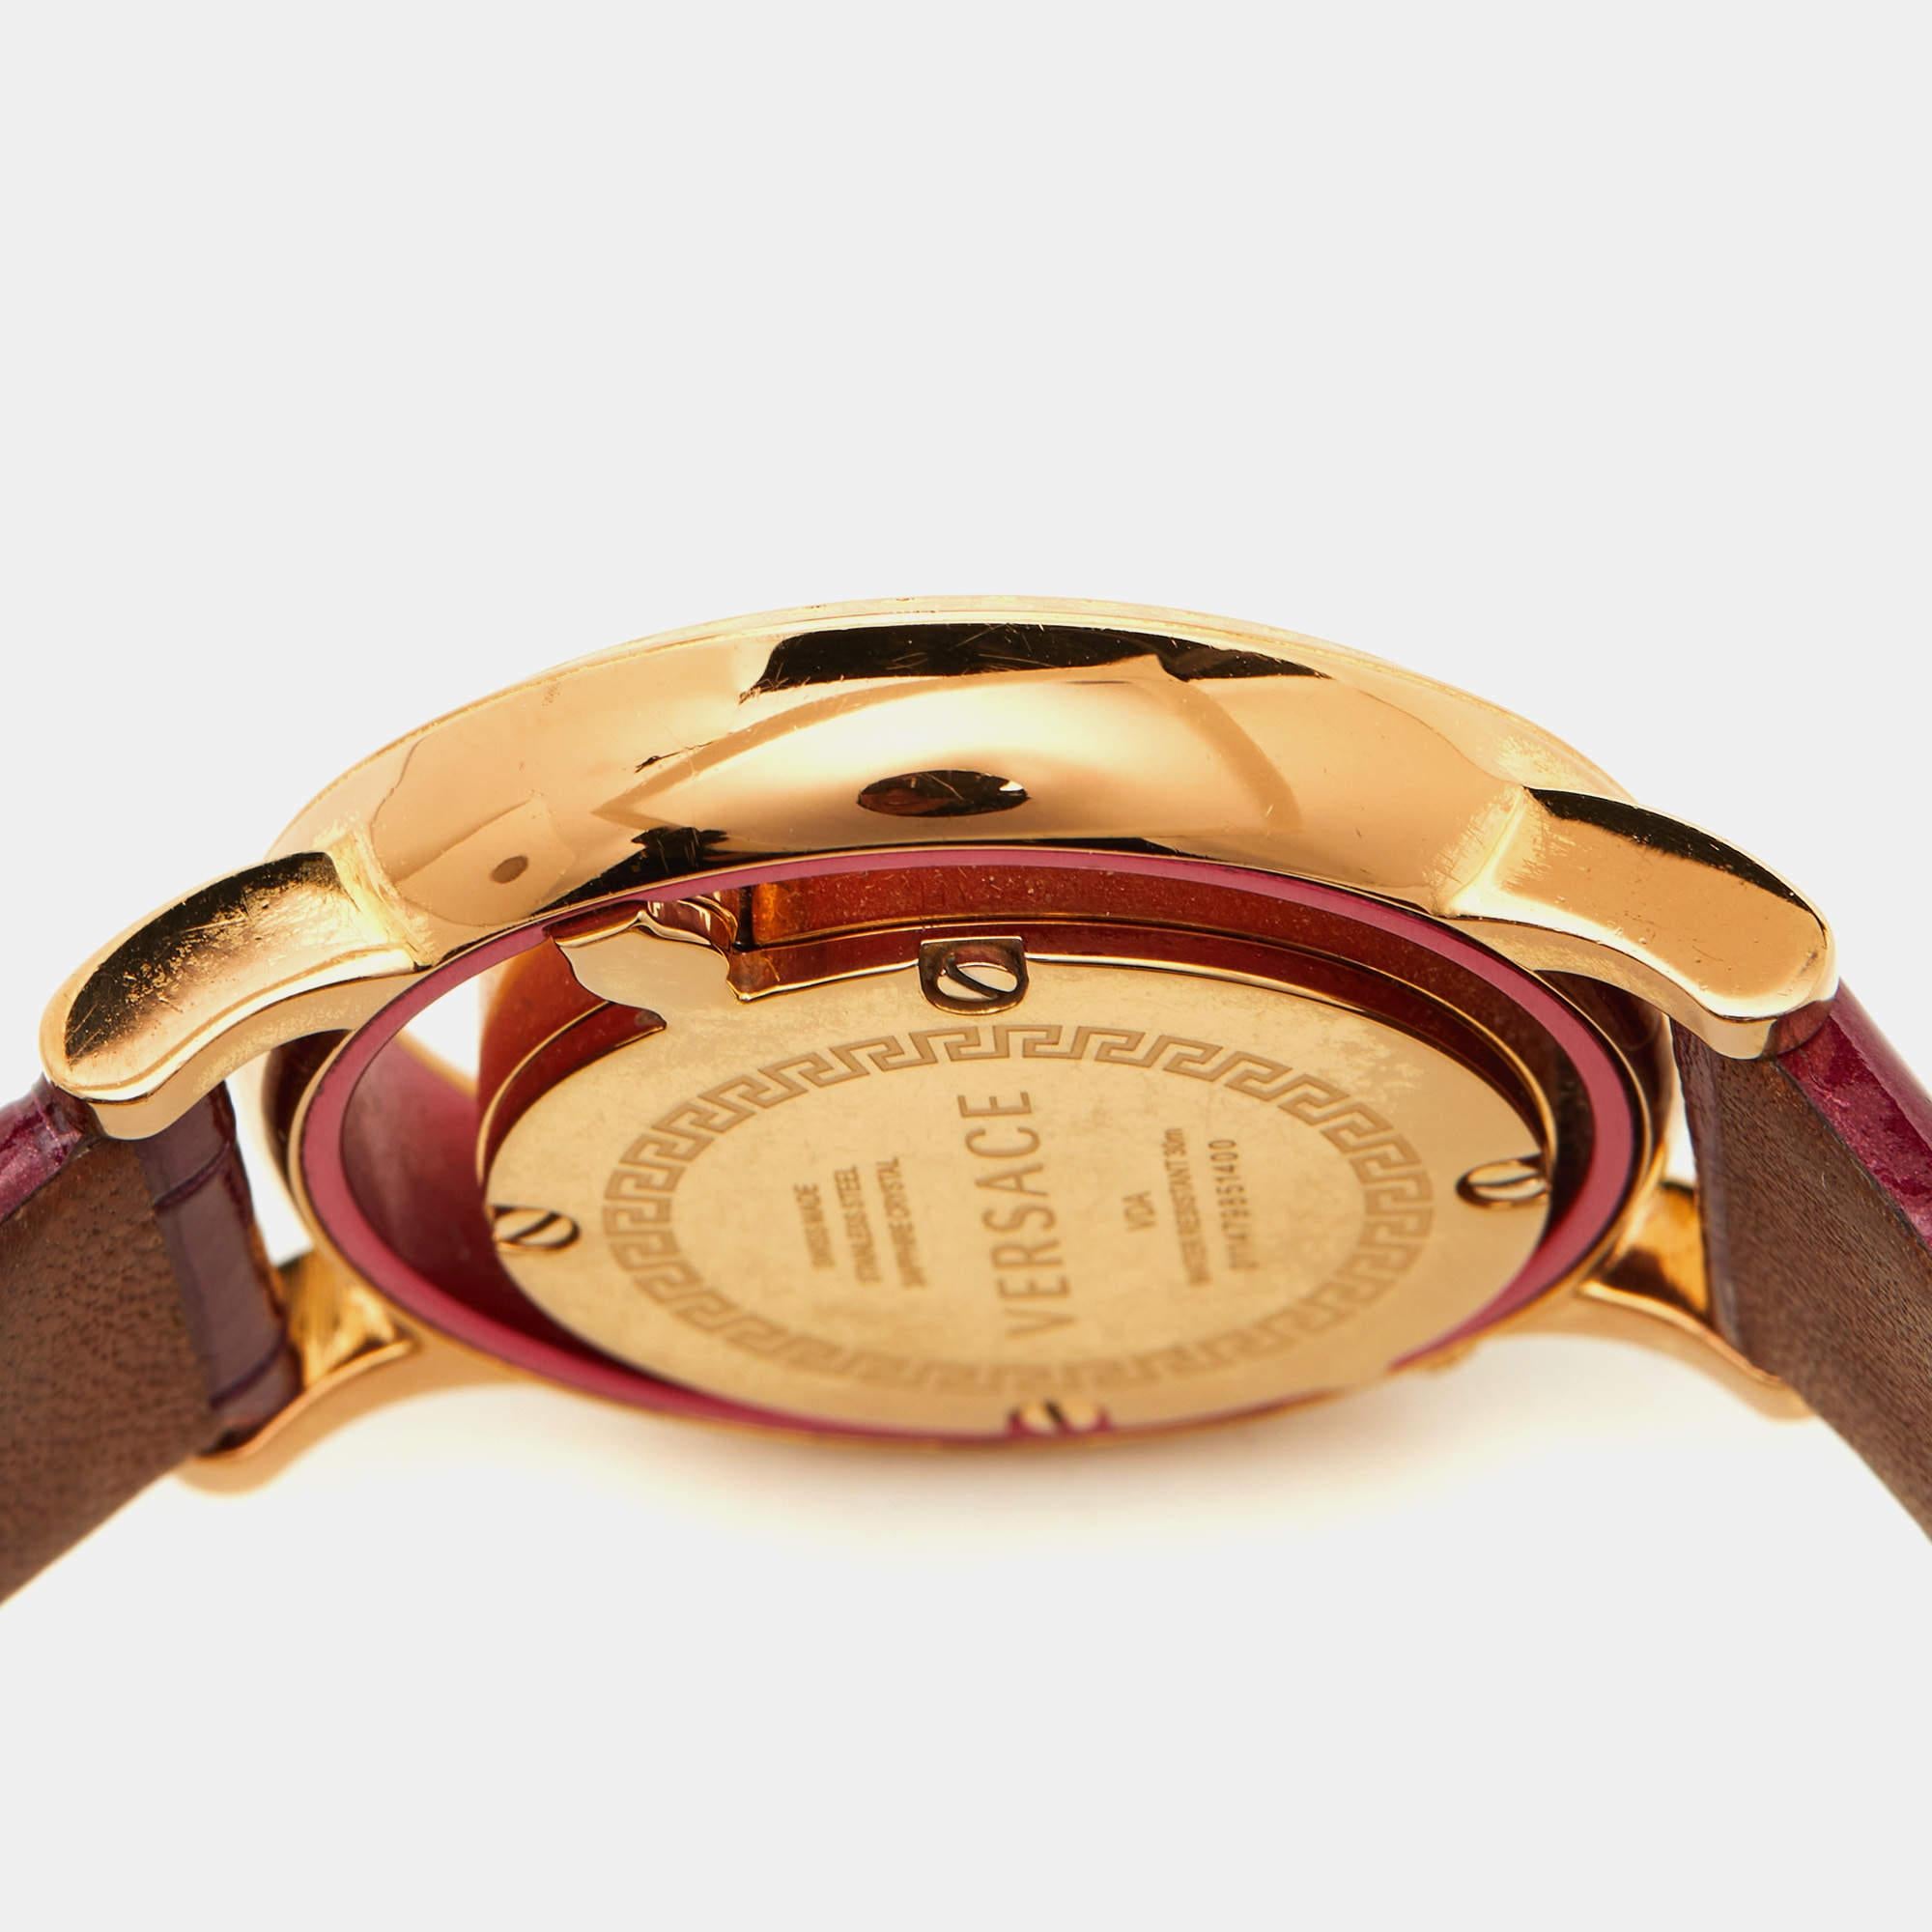 Aesthetic Movement Versace Pink Gold Plated Stainless Steel Leather VDA020014 Women's Wristwatch 33